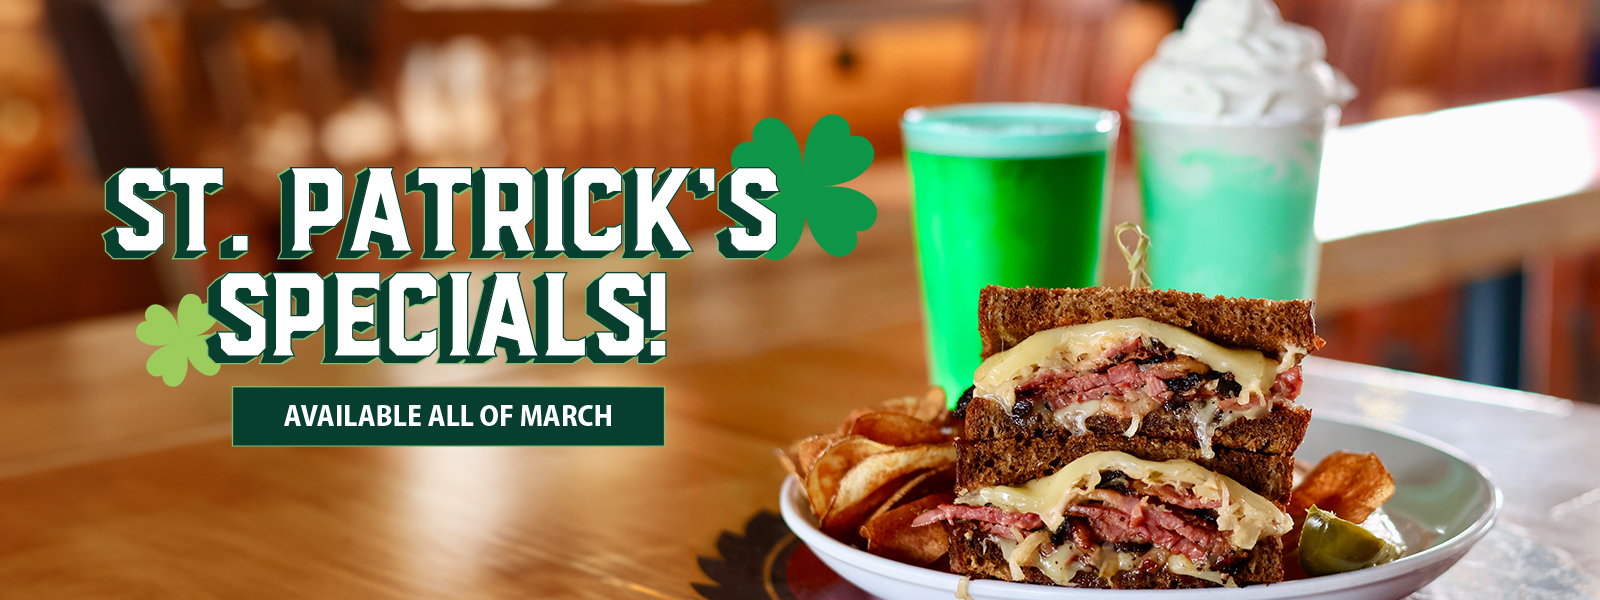 St. Patrick's Day Specials Shamrock Shake Corned Beef Green Beer Buzzrock The Brews Hall